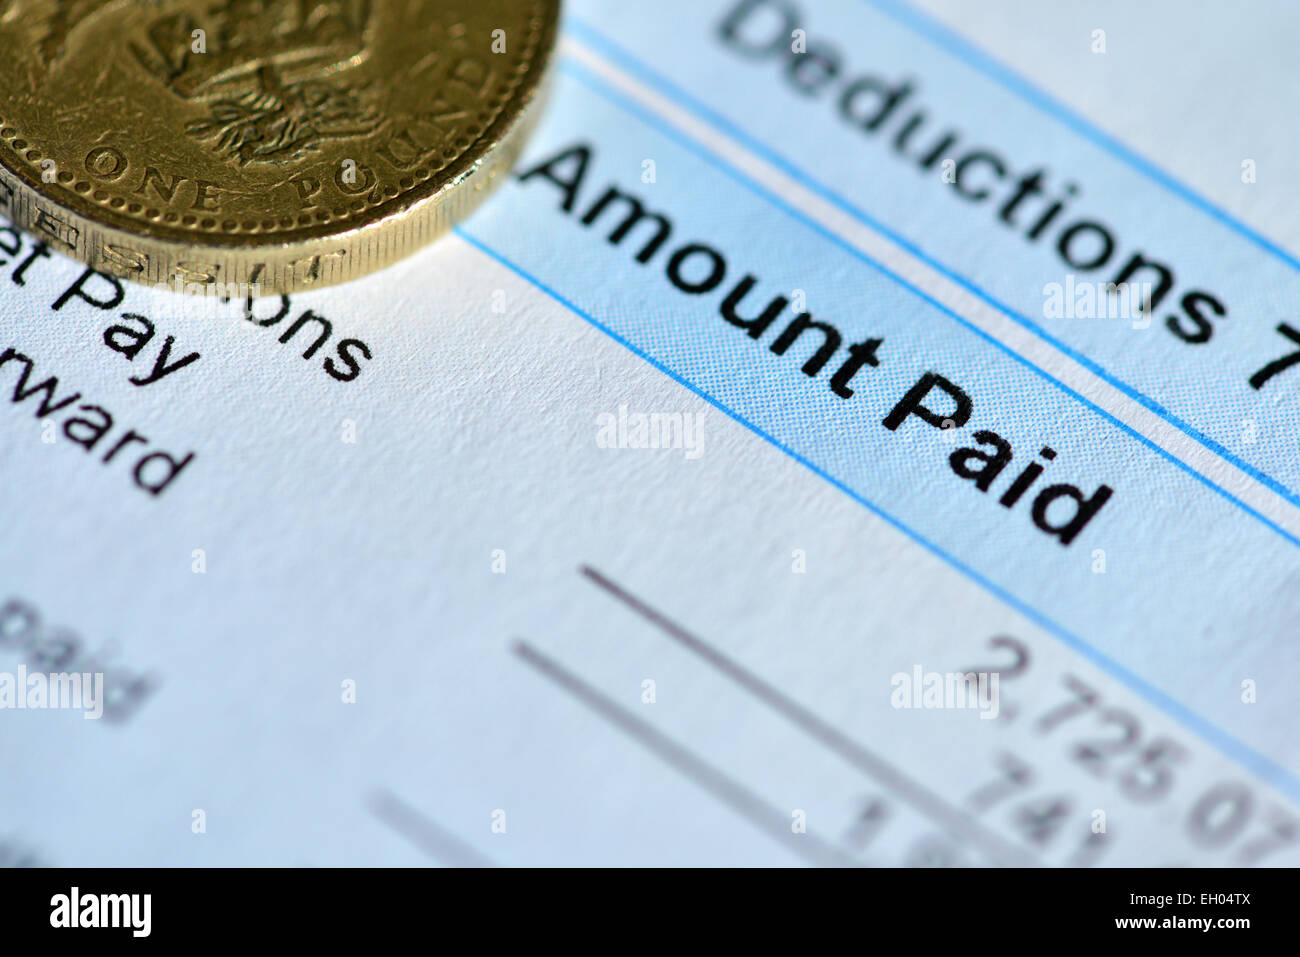 A payslip detailing amount of wages paid Stock Photo